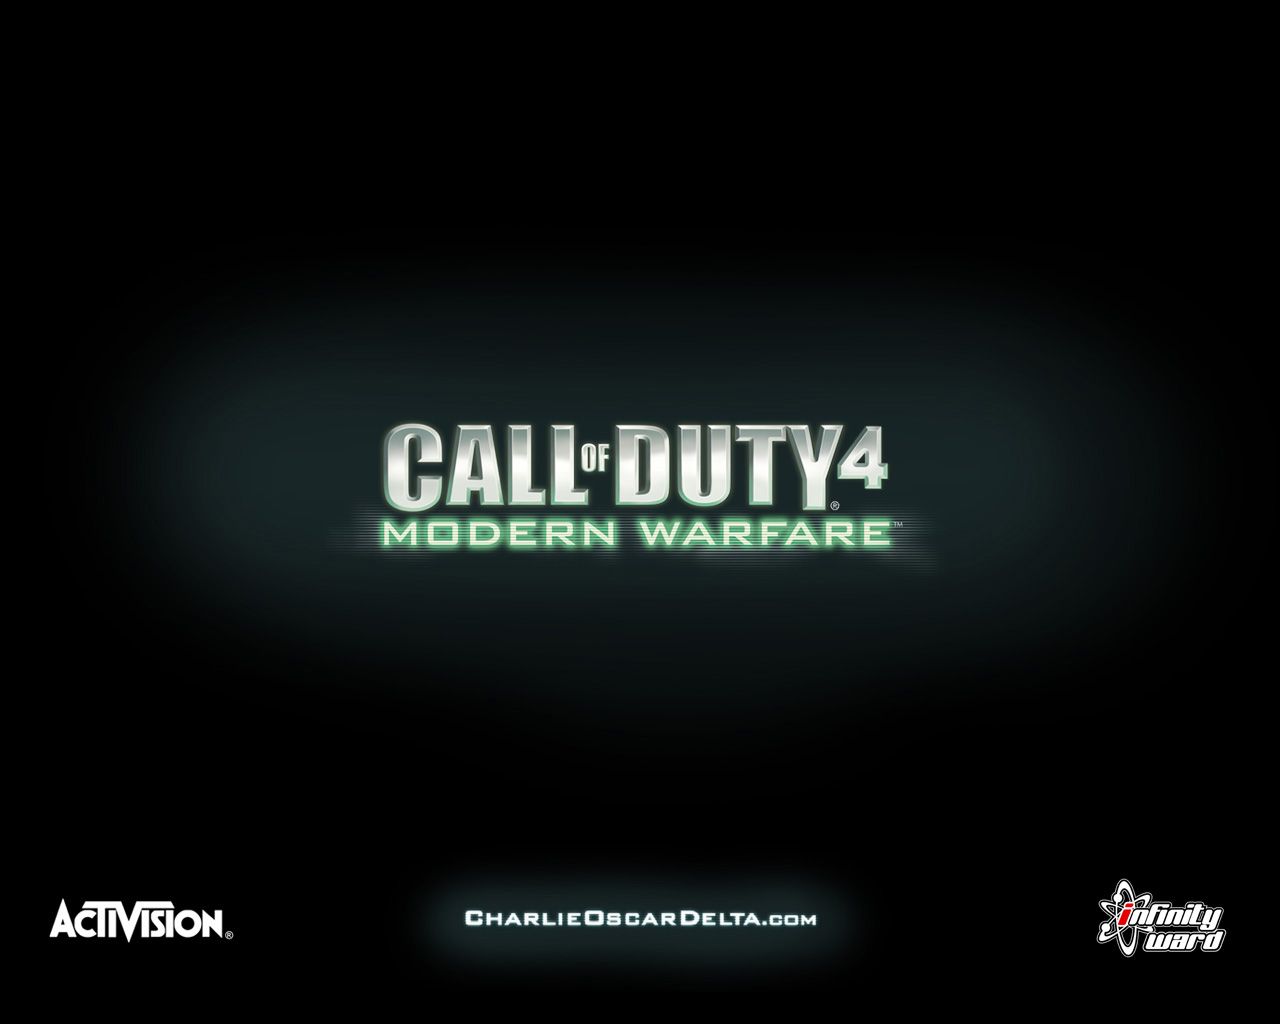 Call of Duty 4 Game Wallpaper Page - Black OPS and Modern Warfare ...